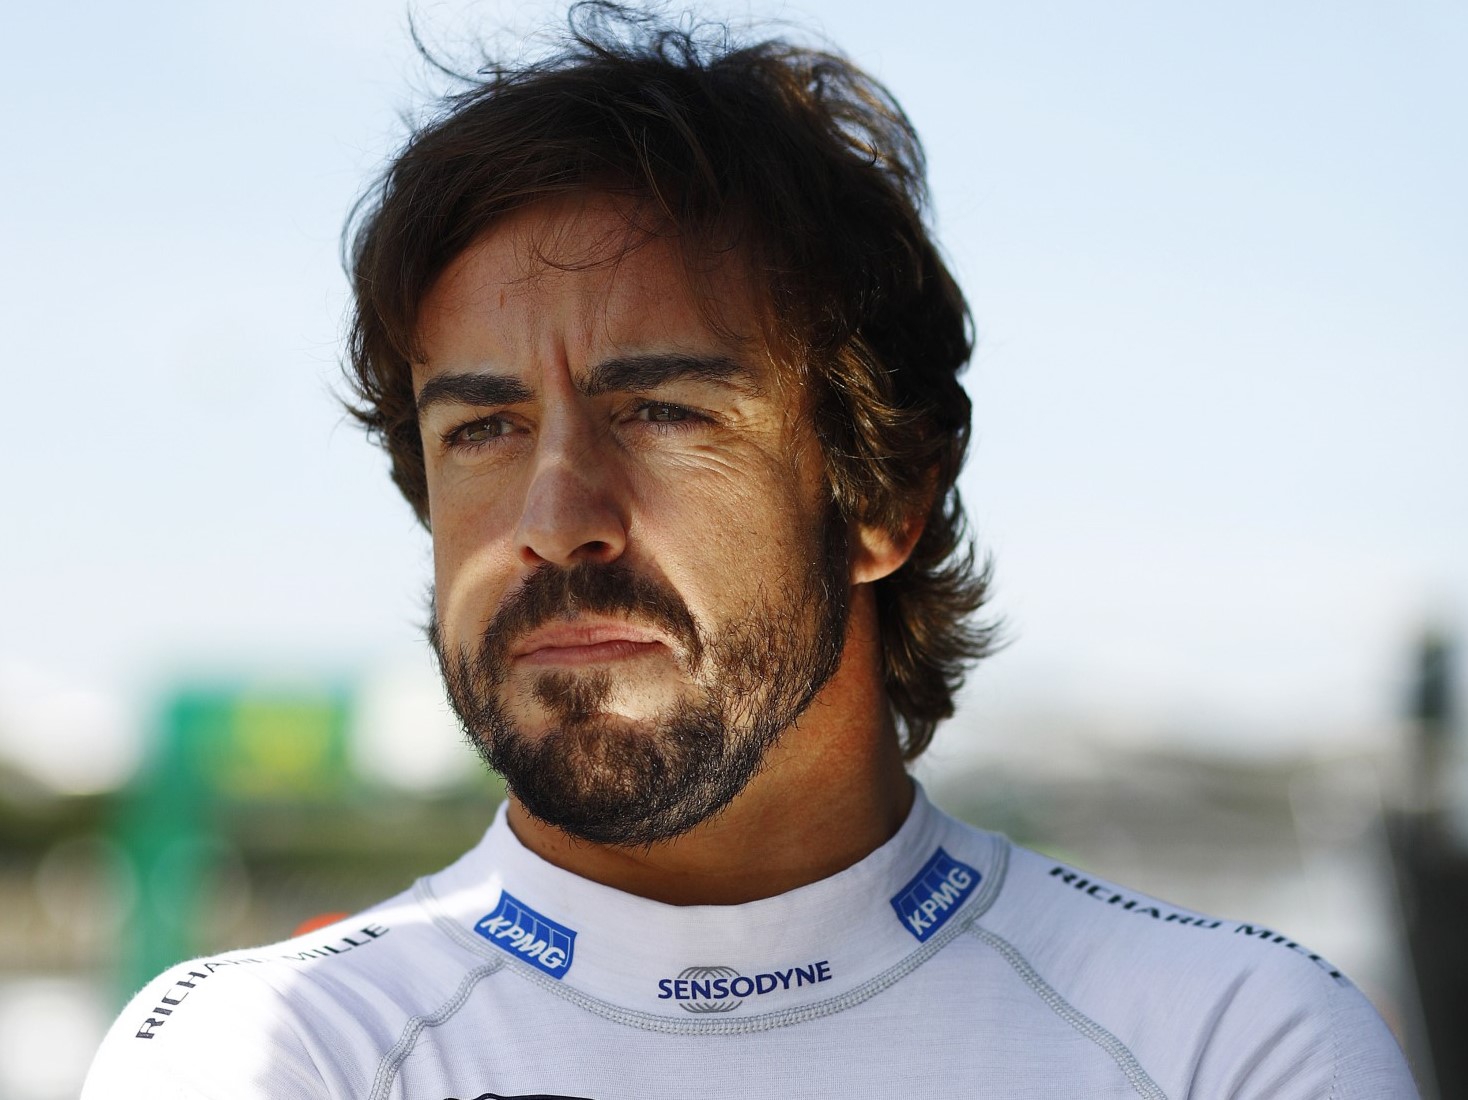 Alonso will add more races to his agenda after the Indy 500